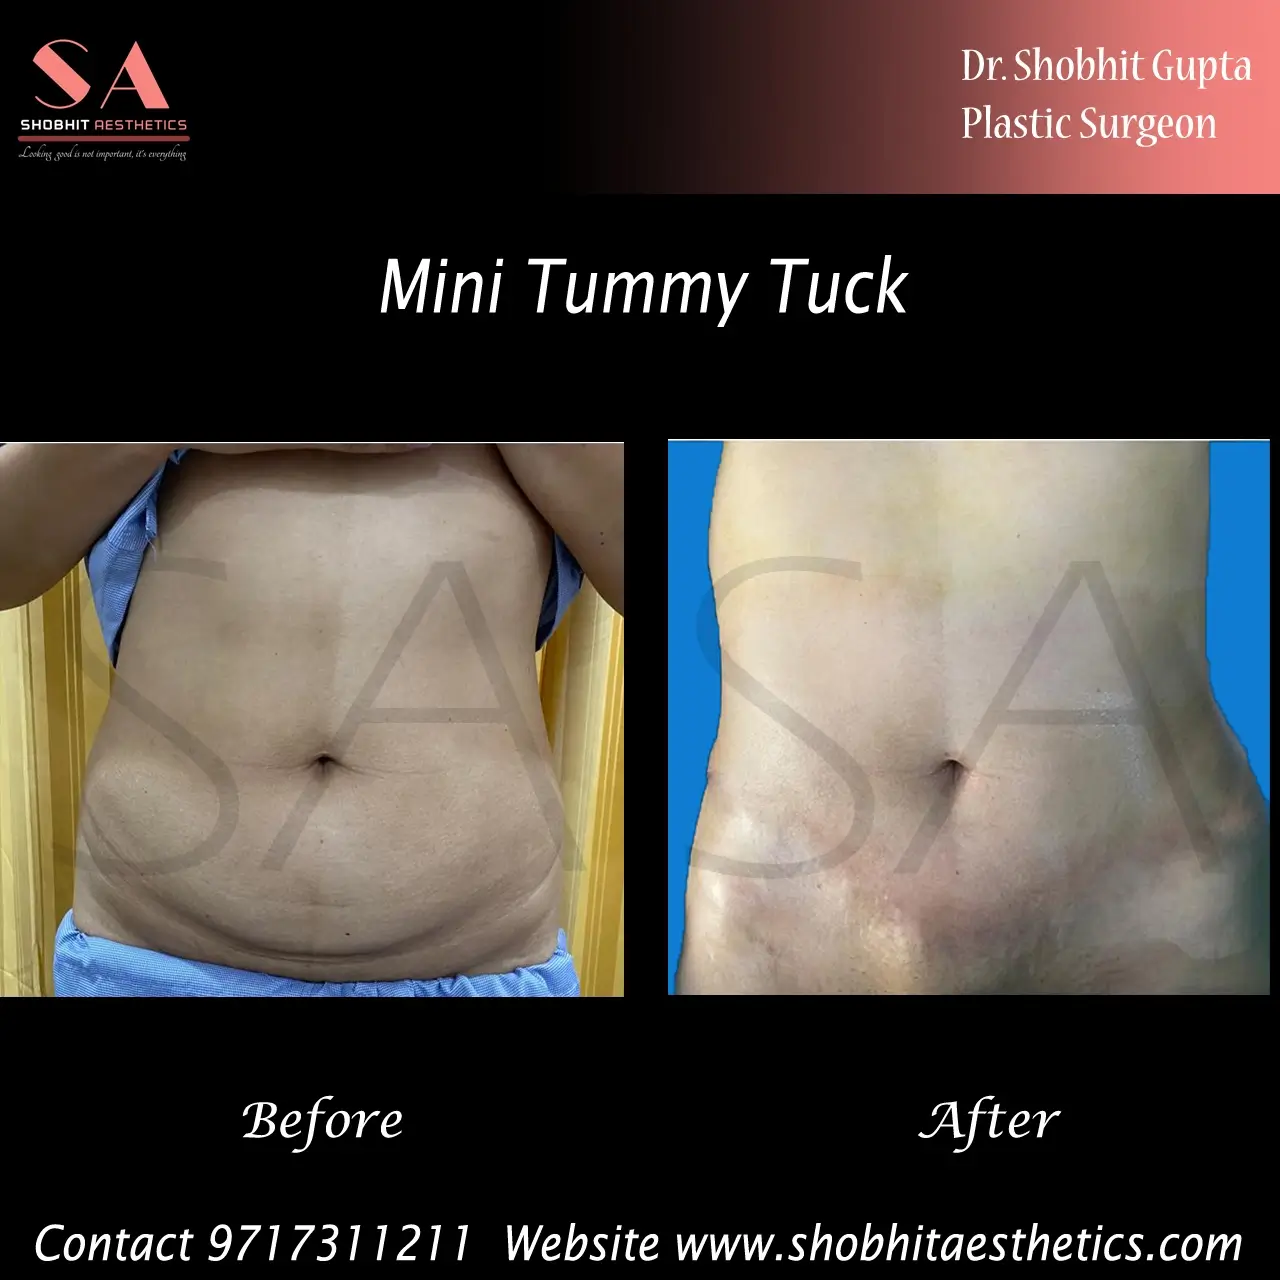 Tummy Tuck in Kanpur